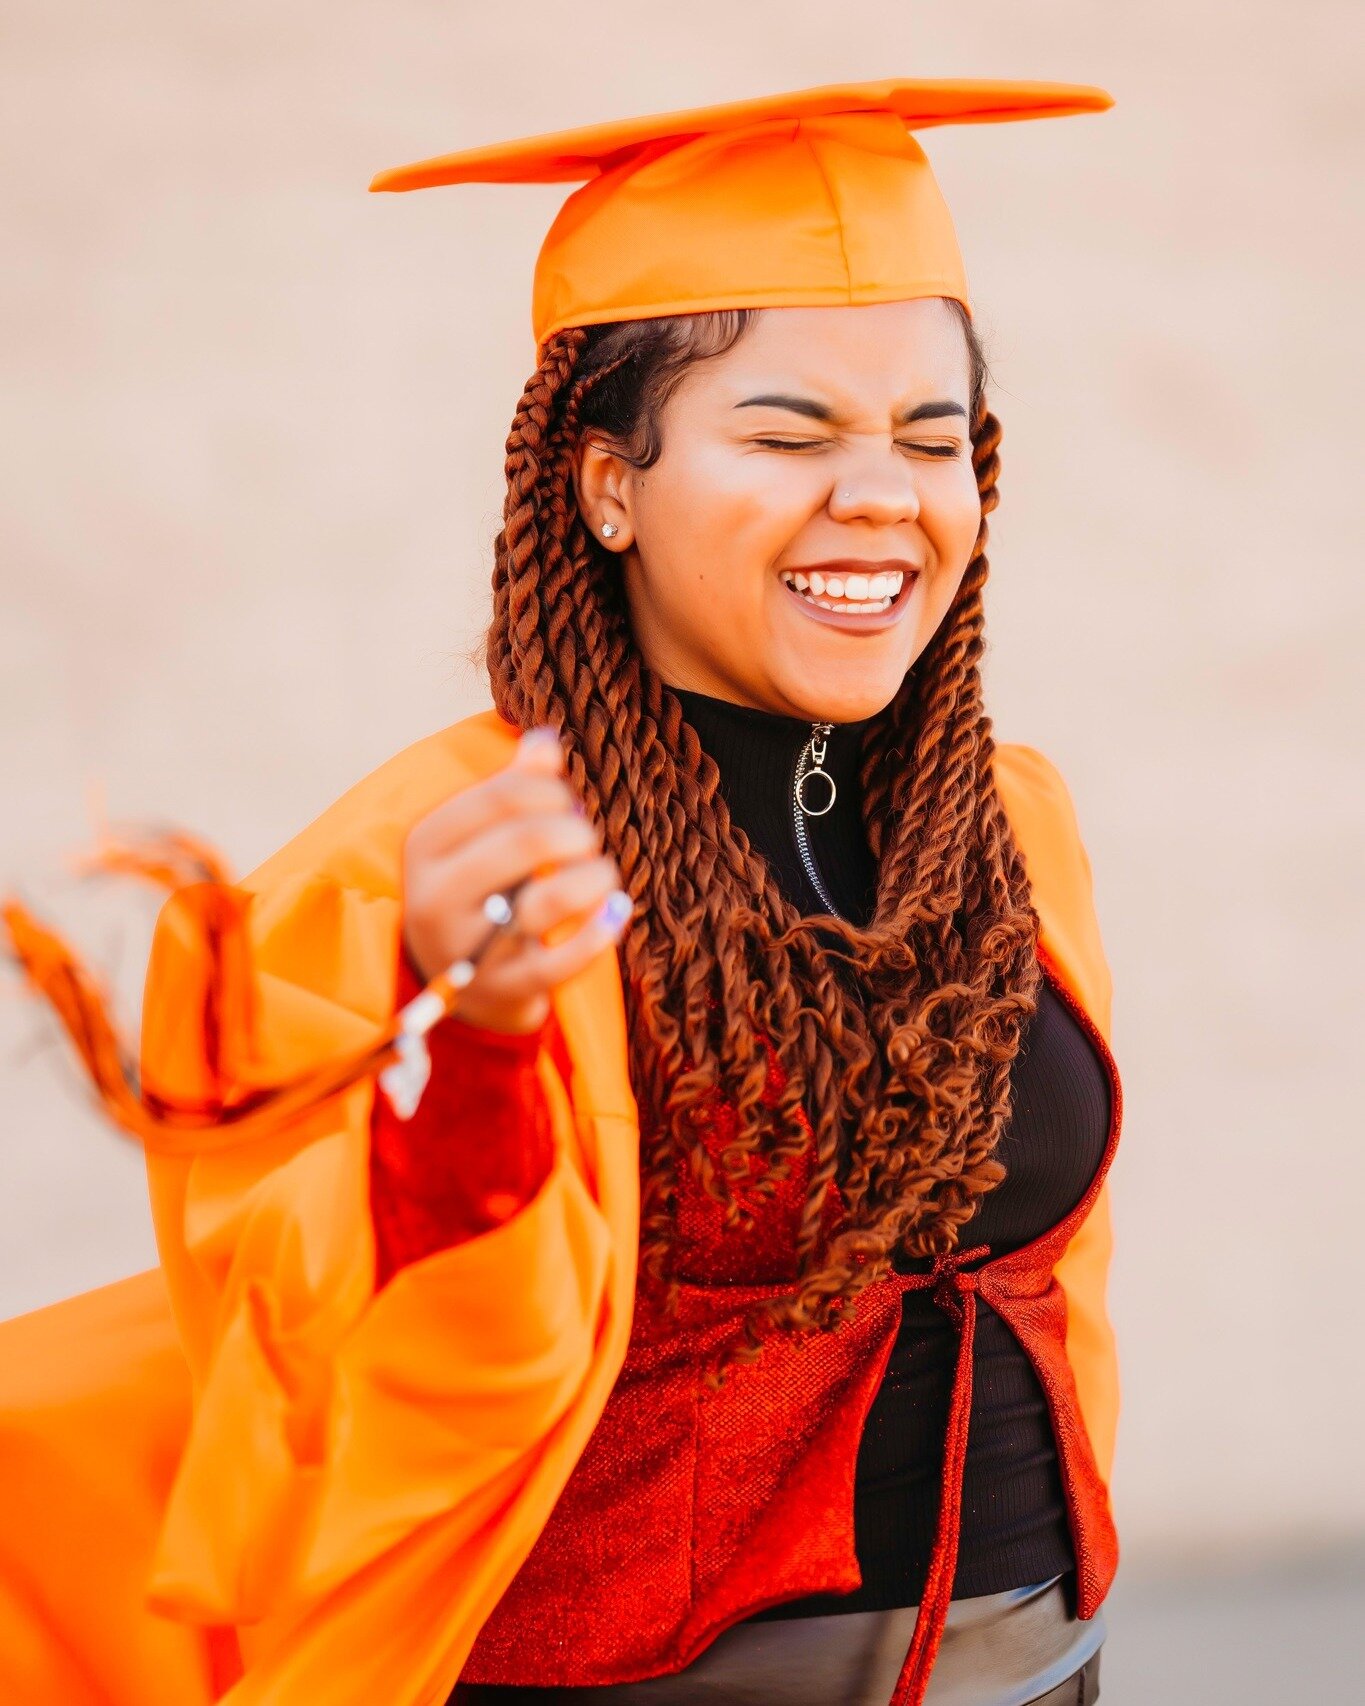 Got to hang out with my Senior Squad last week, and these are just a handful of my faaavs from their cap and gown sessions! 

These photos captures the essence of a triumphant journey, marking the culmination of years of hard work, dedication, and gr